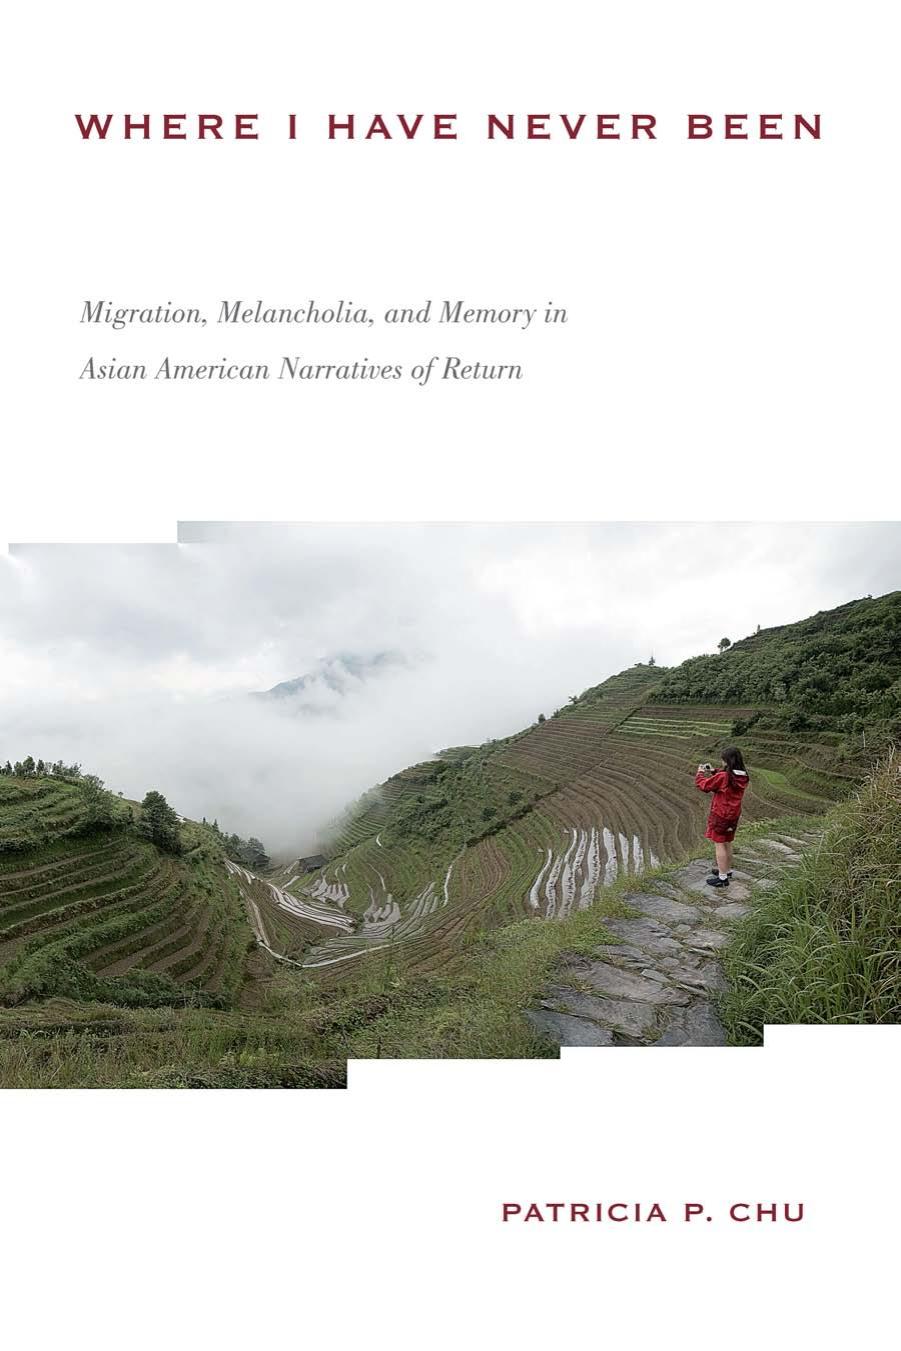 Where I Have Never Been: Migration, Melancholia, and Memory in Asian American Narratives of Return by Patricia P. Chu